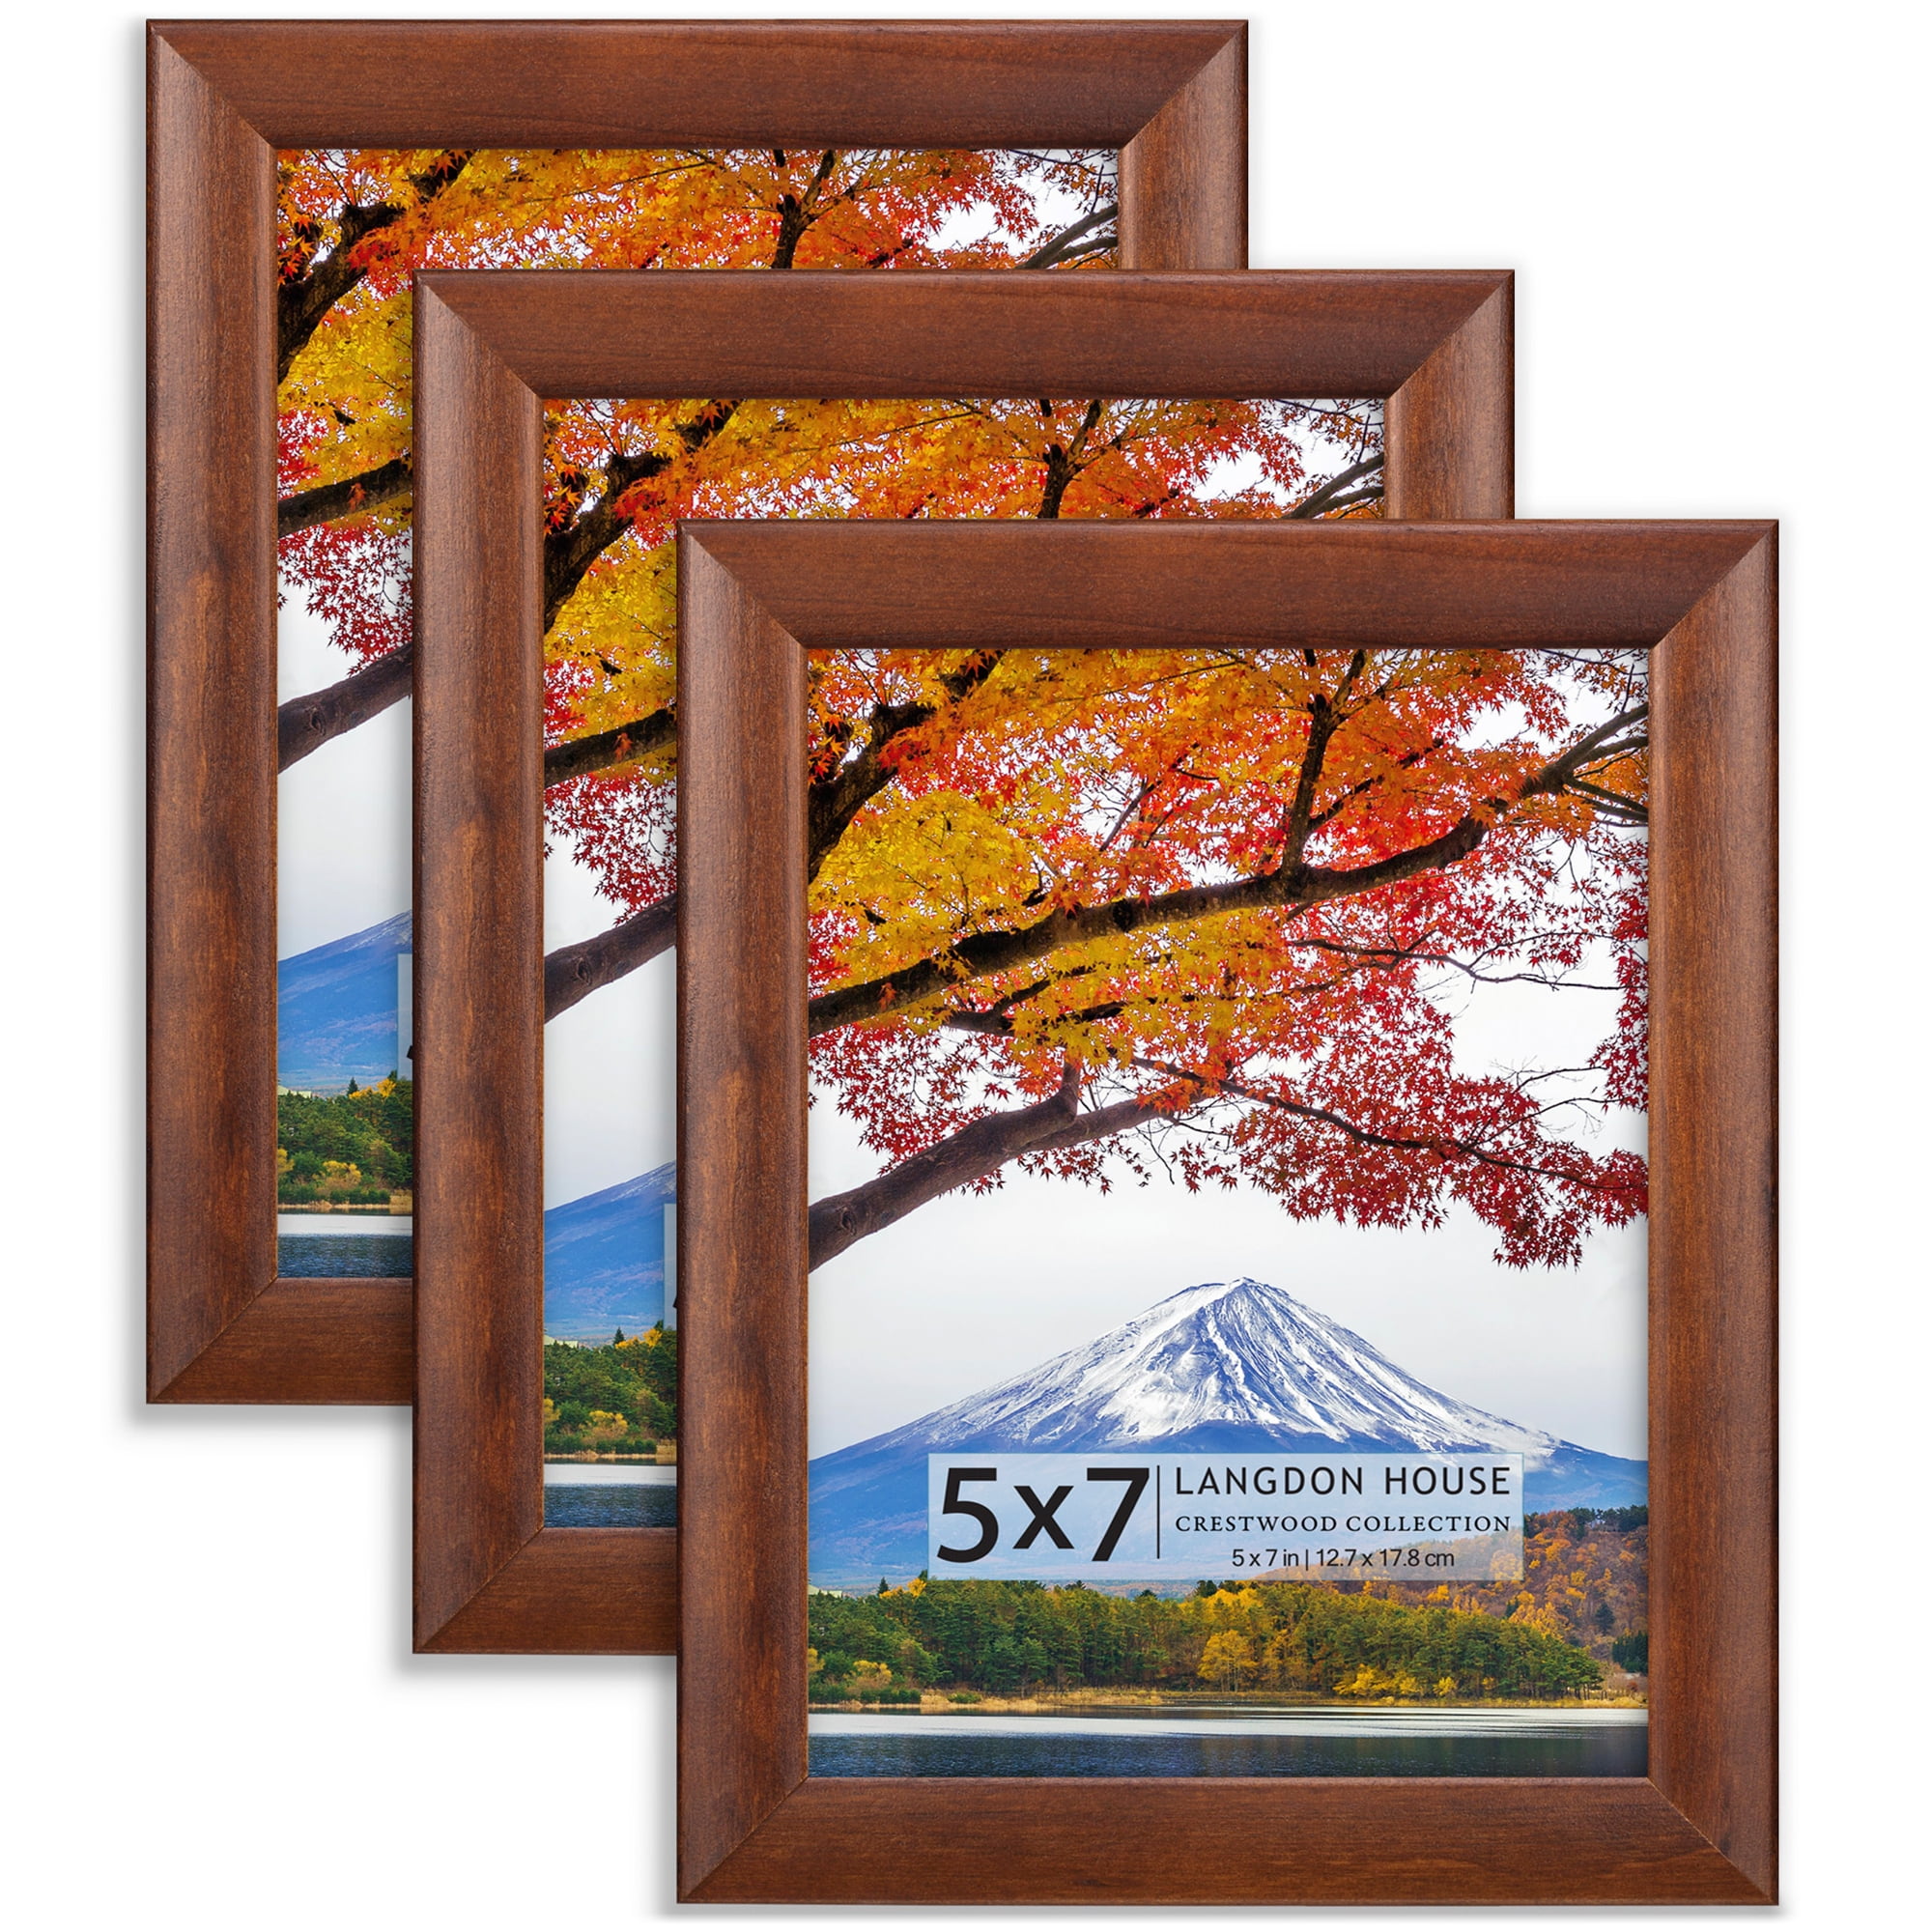 Stained Glass Photo Frame fits 5 x 7